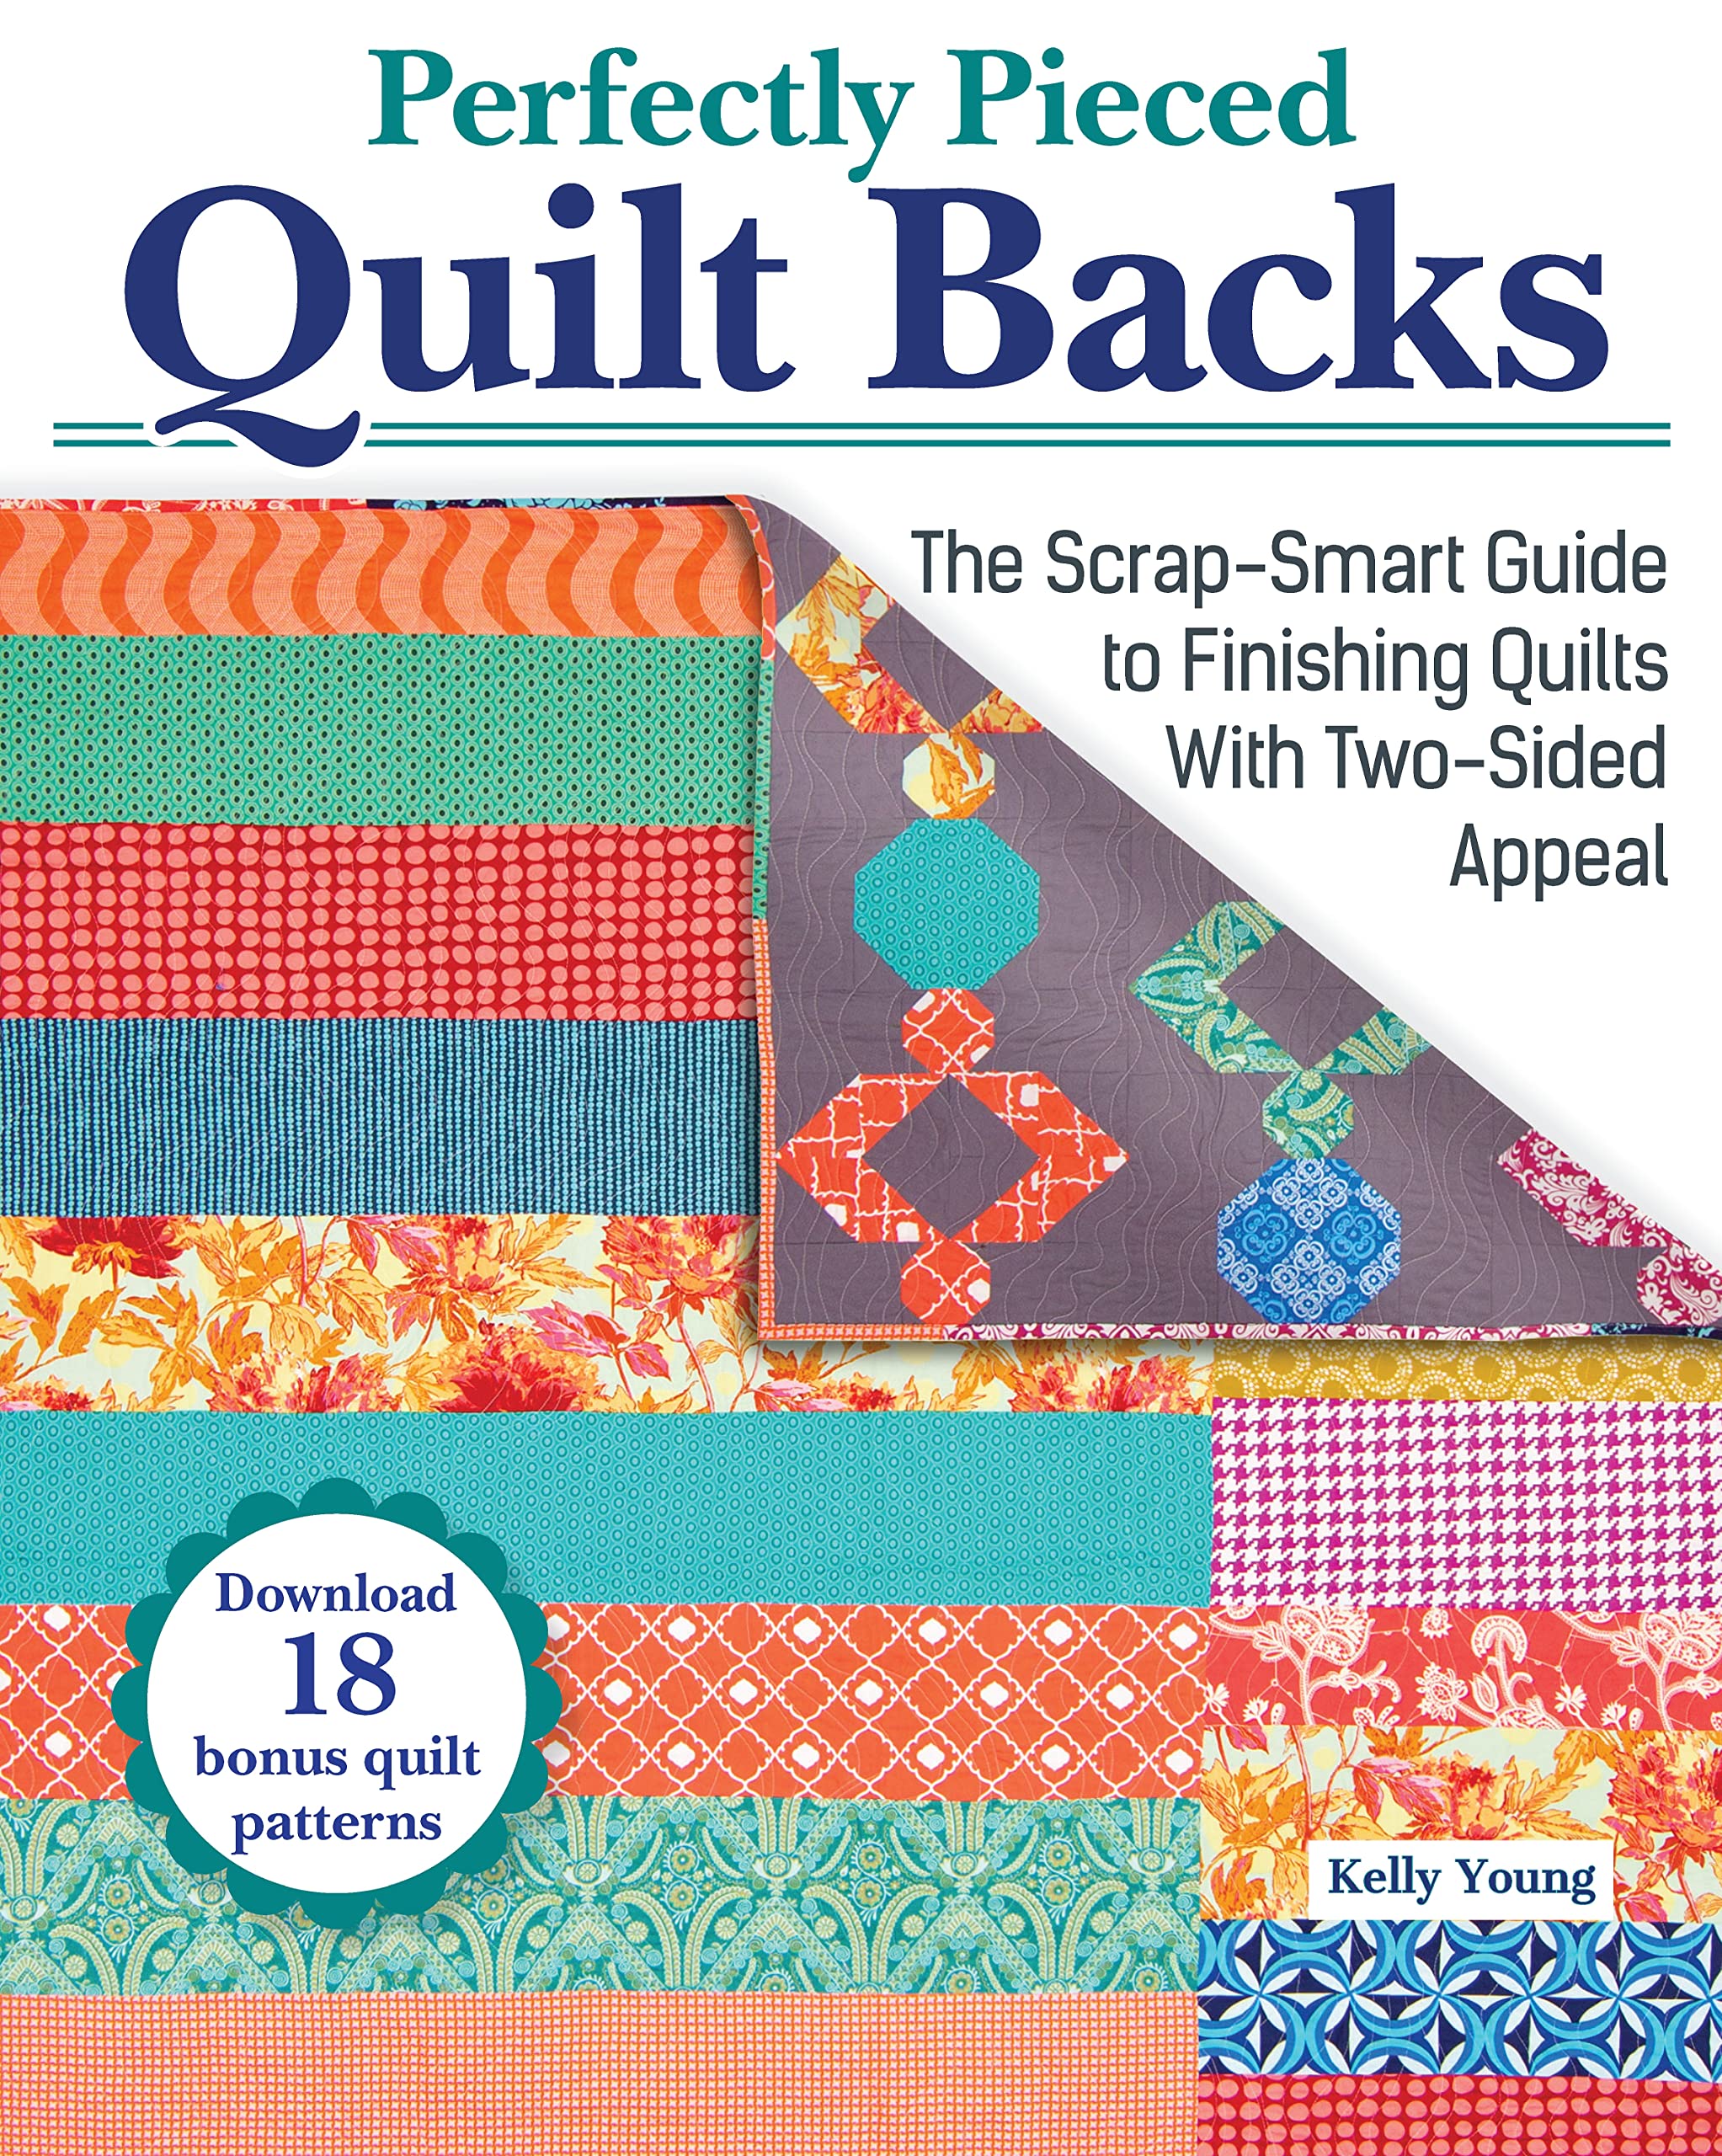 12 Free Christmas Quilt Patterns To Use Up Your Scraps - Scrap